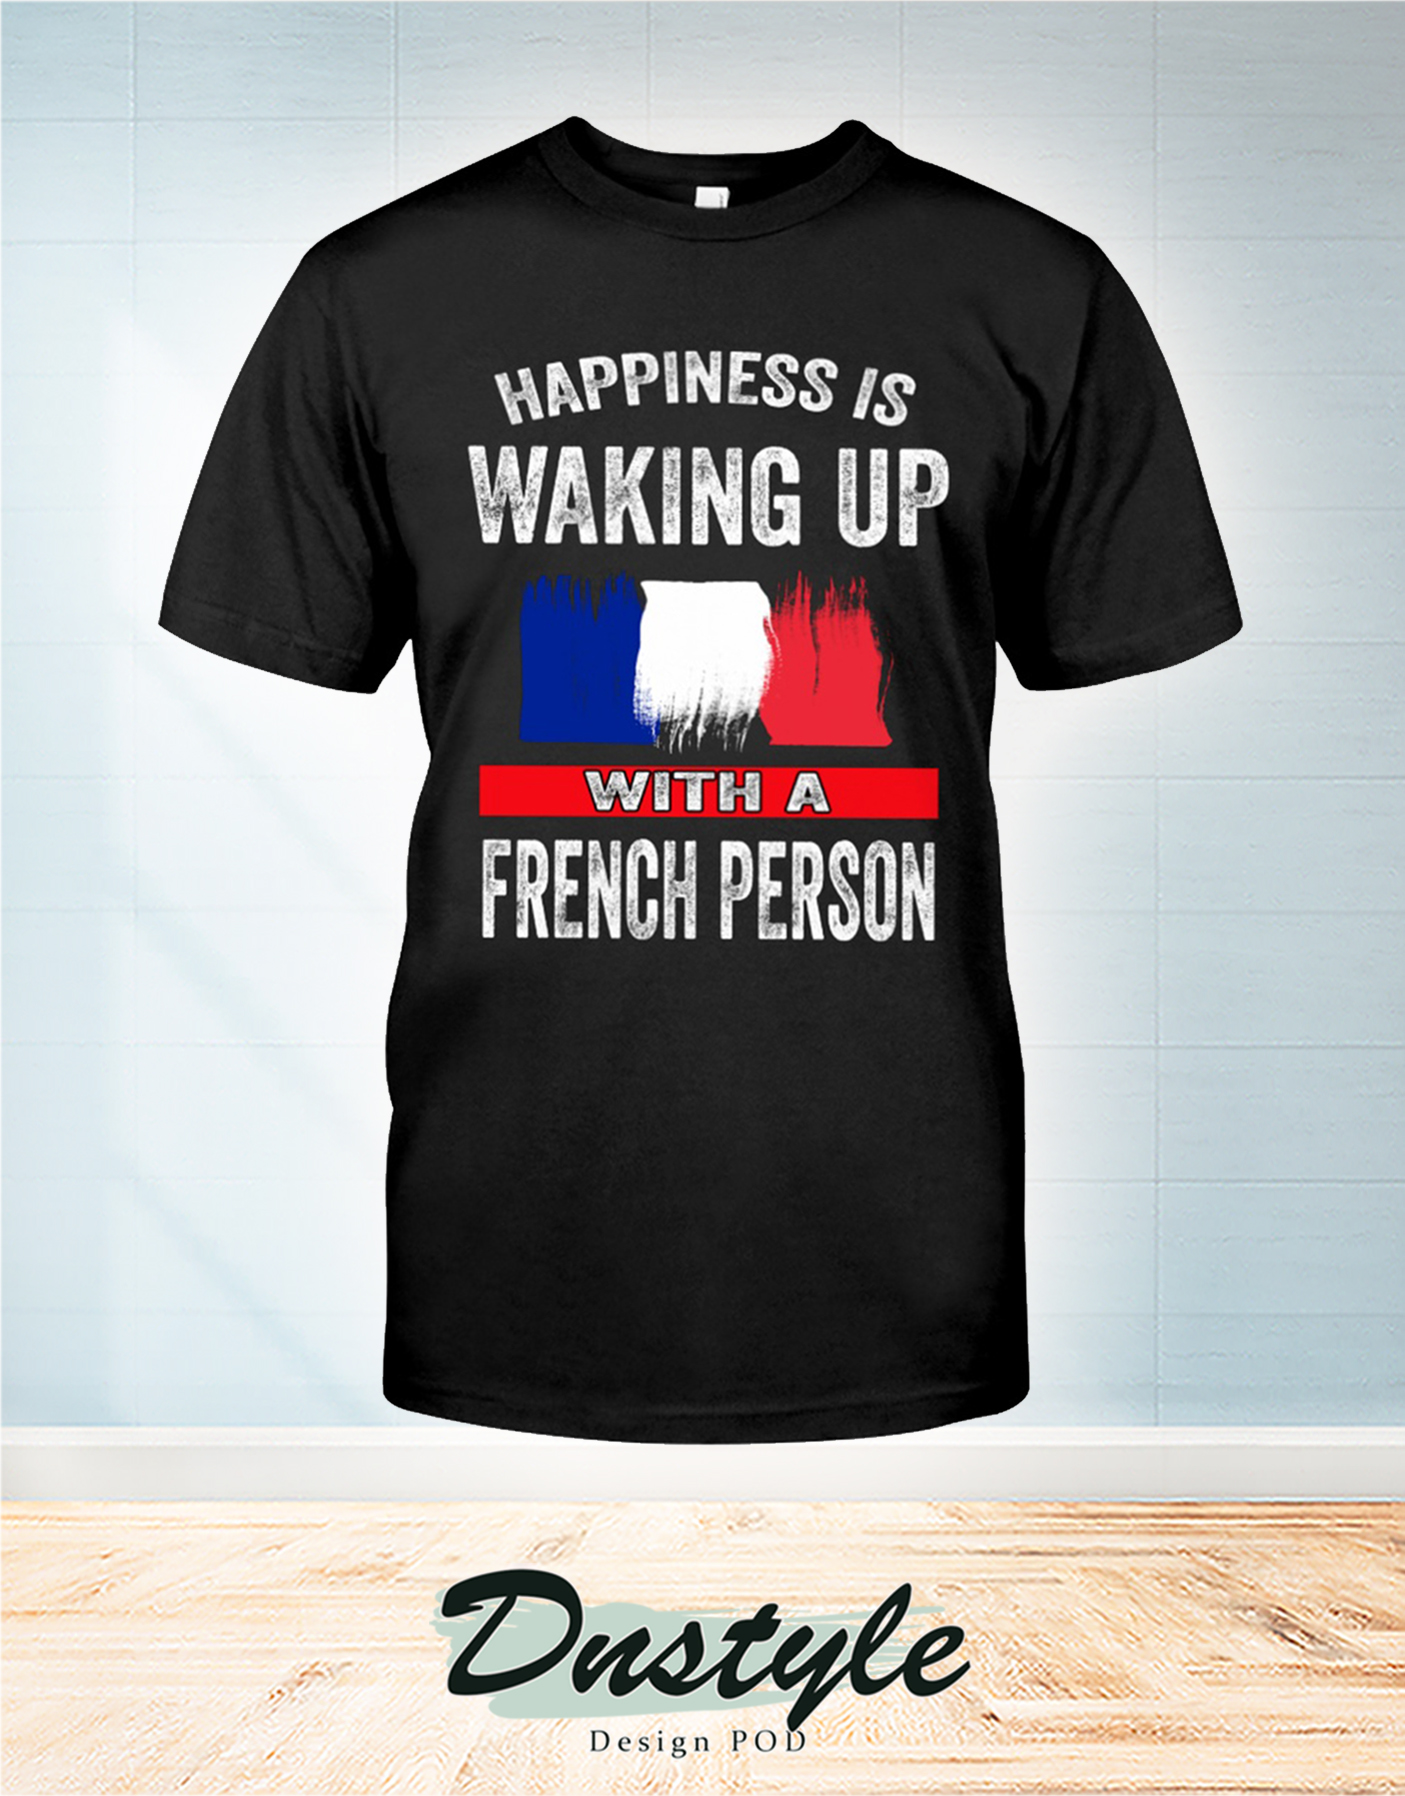 Happiness is waking up with a french person t-shirt